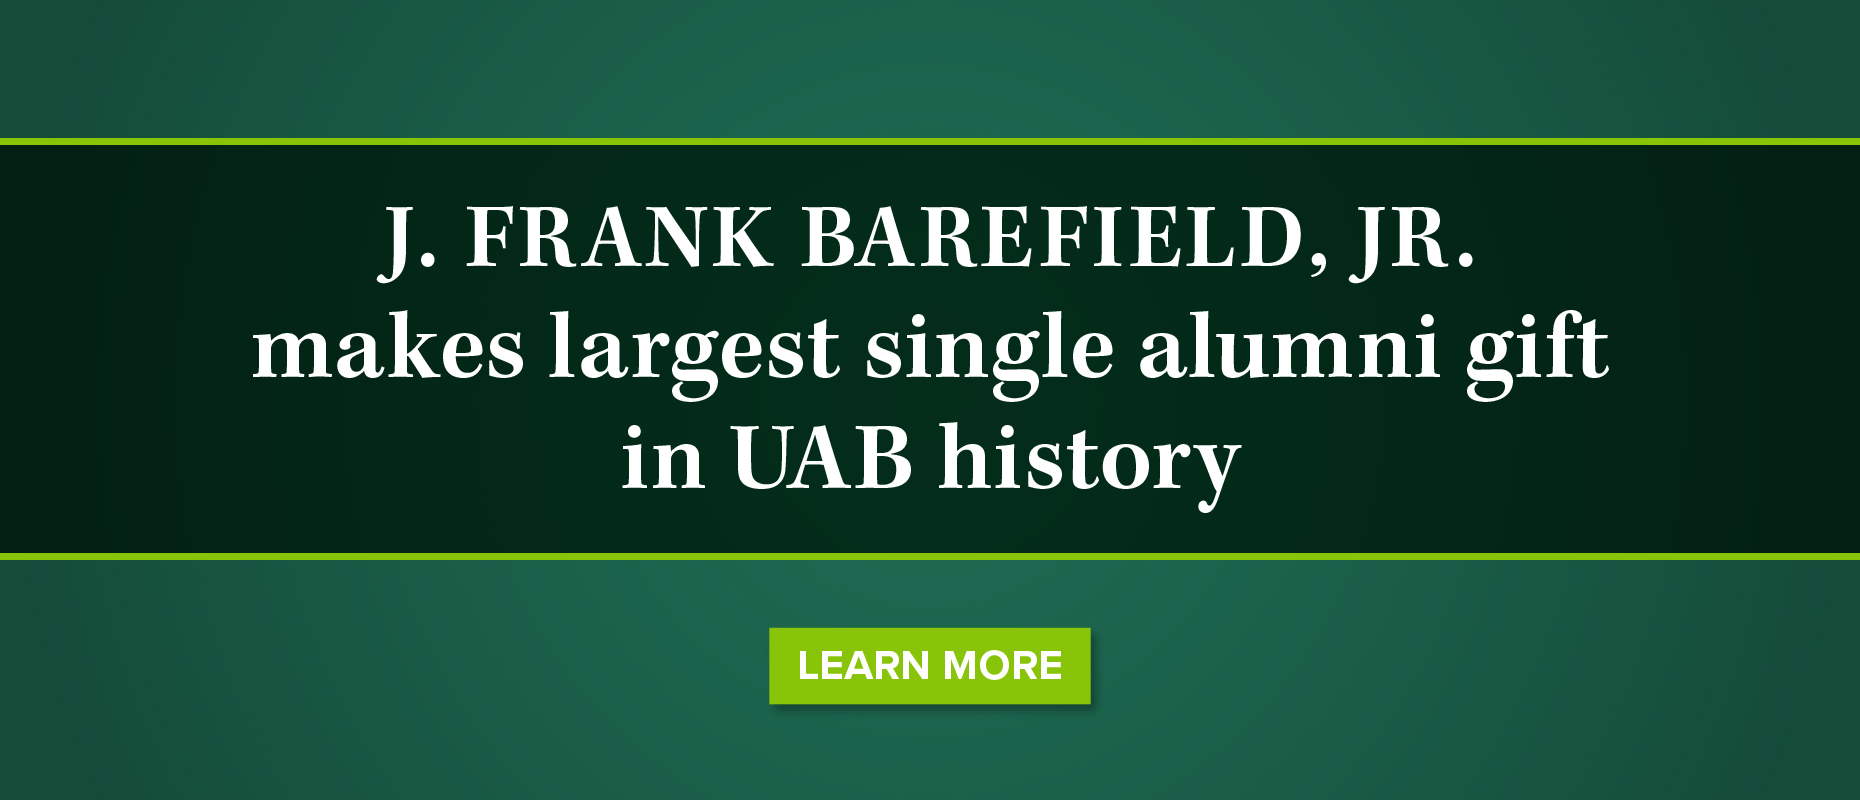 J. Frank Barefield, Jr. makes largest single alumni gift in UAB history. Learn more.